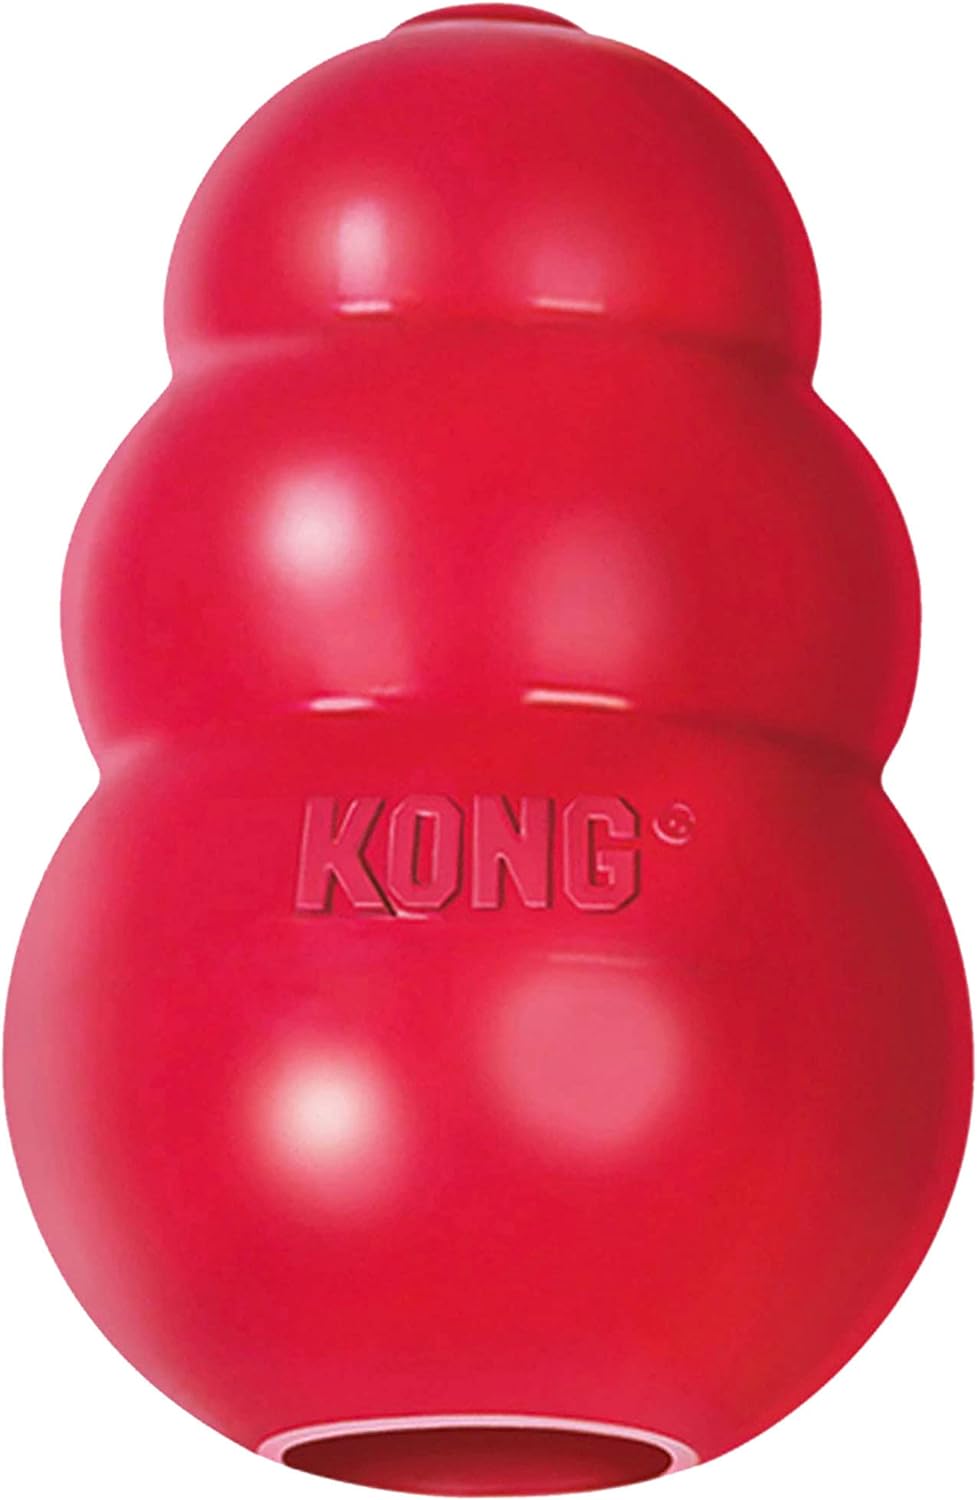 KONG - Classic Dog Toy, Durable Natural Rubber- Fun to Chew, Chase and Fetch - for Medium Dogs